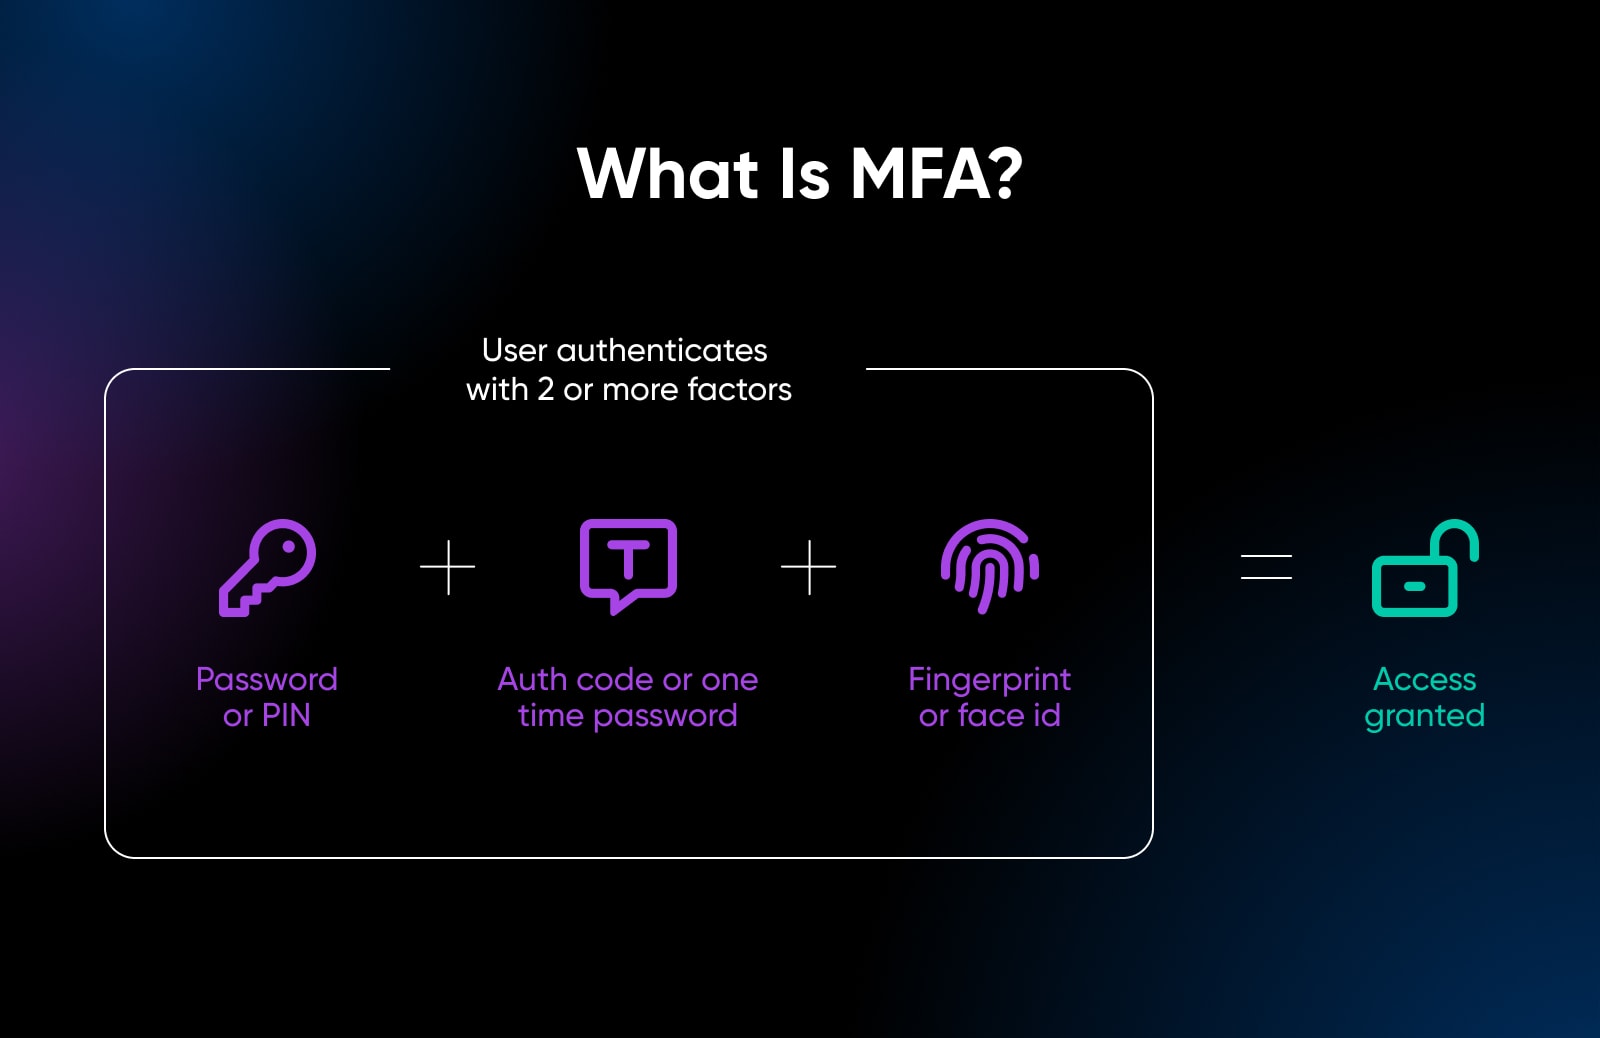 what is MFA? user authenticates 2 or more factors like password and auth code or auth code and fingerprint or password and auth code and fingerprint